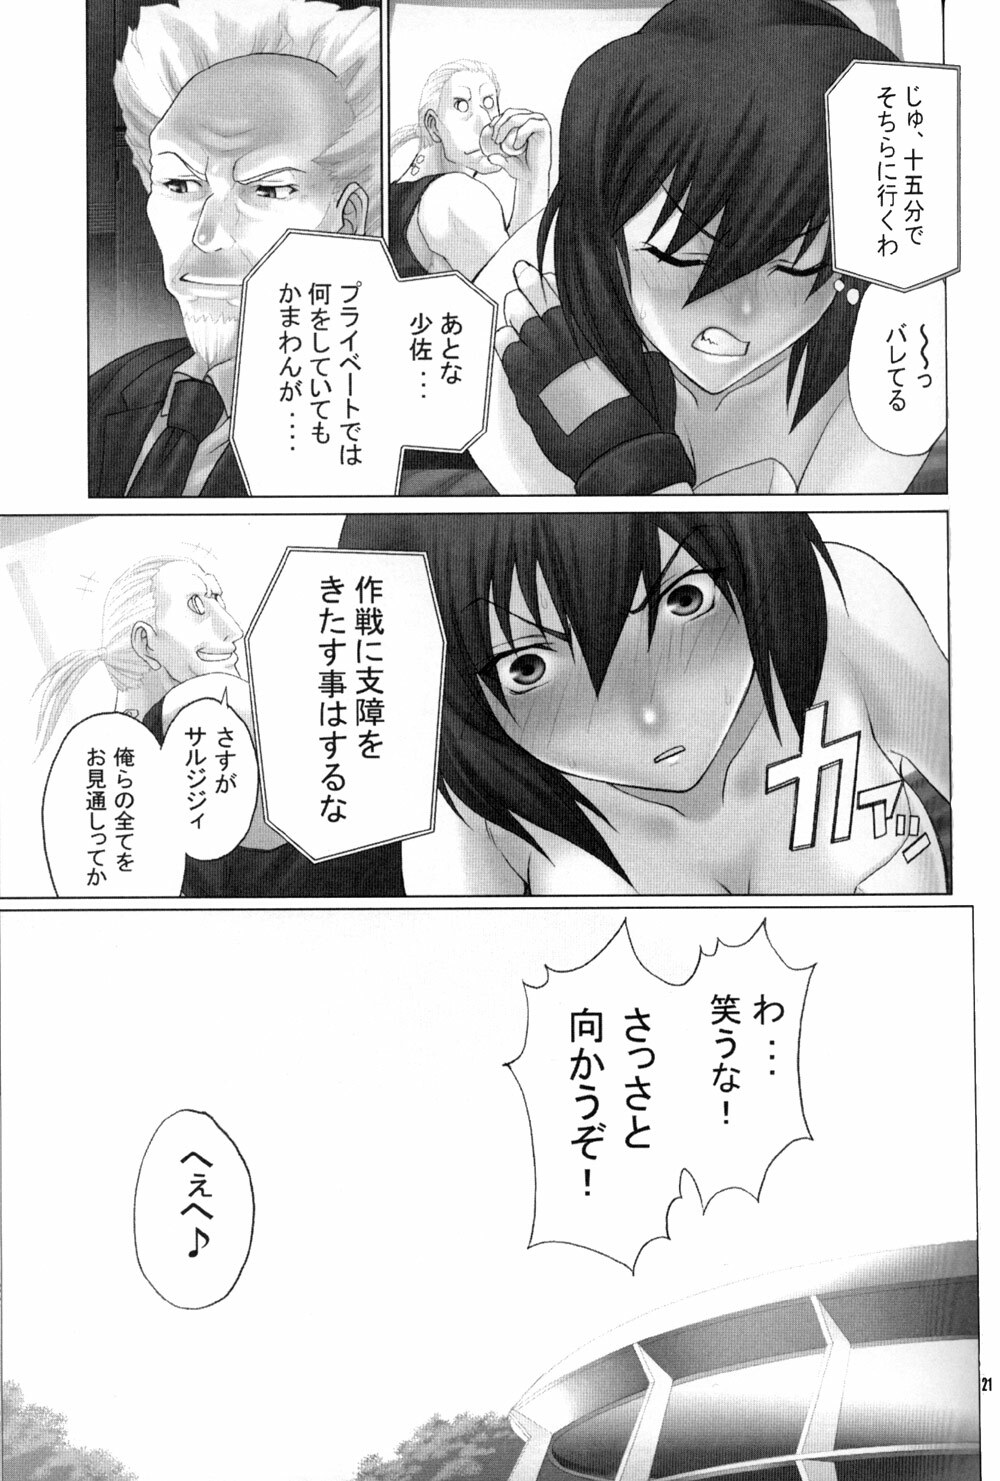 (C66) [Runners High (Chiba Toshirou)] CELLULOID - ACME (Ghost in the Shell) page 21 full